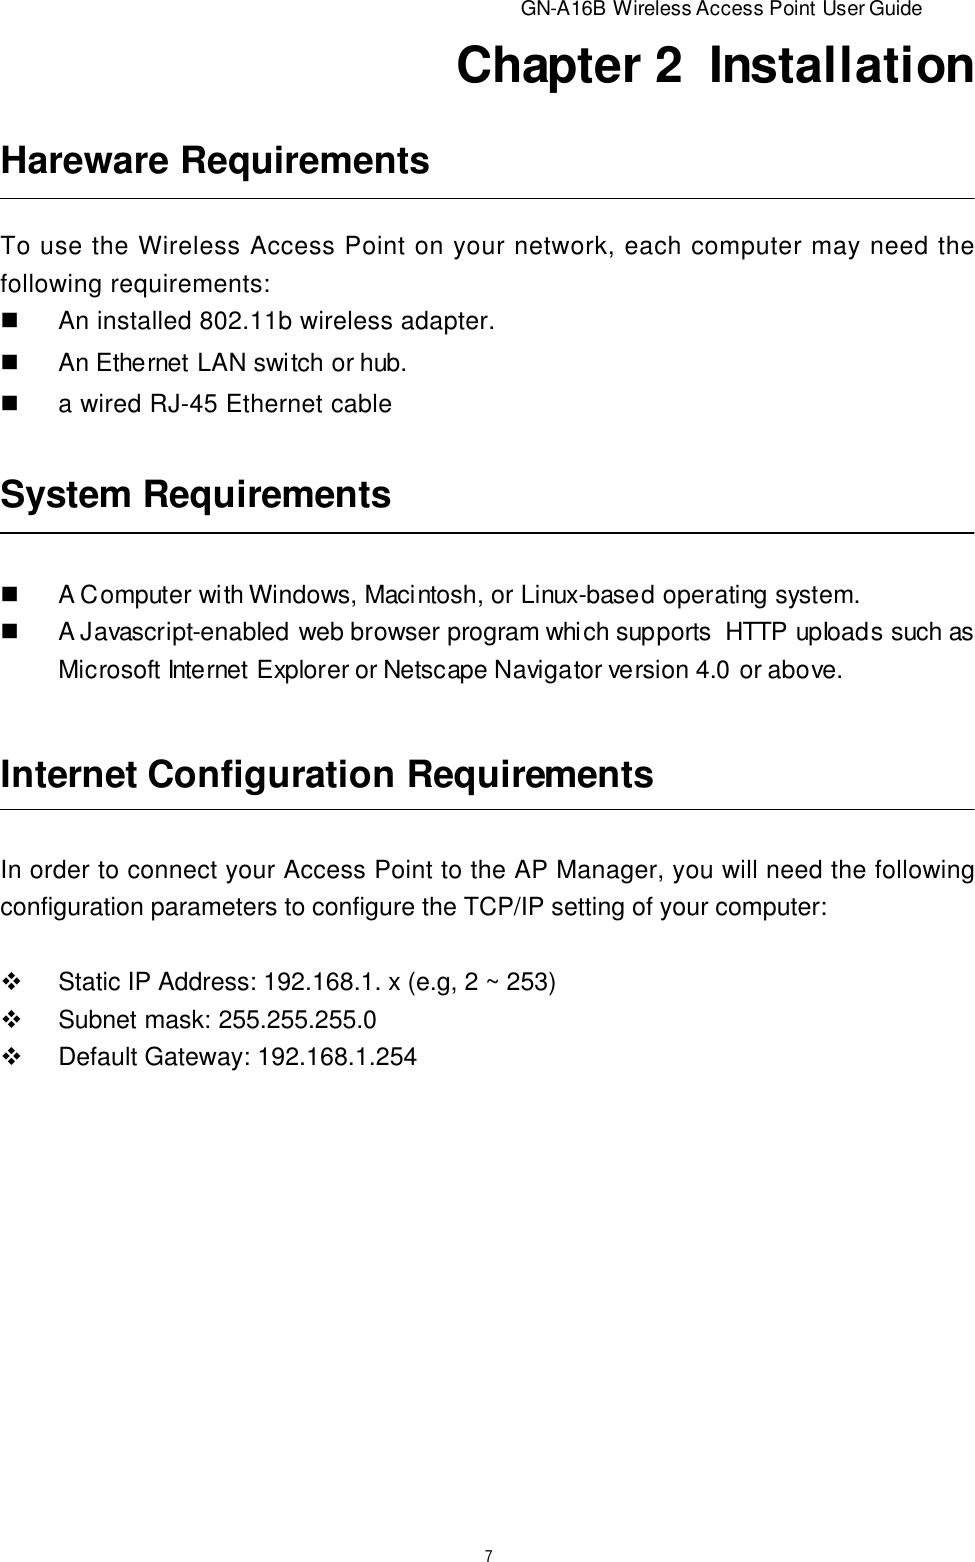                          GN-A16B Wireless Access Point User Guide7Chapter 2  InstallationSystem RequirementsnA Computer with Windows, Macintosh, or Linux-based operating system.nA Javascript-enabled web browser program which supports  HTTP upIoads such asMicrosoft Internet Explorer or Netscape Navigator version 4.0 or above.Internet Configuration RequirementsIn order to connect your Access Point to the AP Manager, you will need the followingconfiguration parameters to configure the TCP/IP setting of your computer:vStatic IP Address: 192.168.1. x (e.g, 2 ~ 253)vSubnet mask: 255.255.255.0vDefault Gateway: 192.168.1.254Hareware RequirementsTo use the Wireless Access Point on your network, each computer may need thefollowing requirements:nAn installed 802.11b wireless adapter.nAn Ethernet LAN switch or hub.na wired RJ-45 Ethernet cable